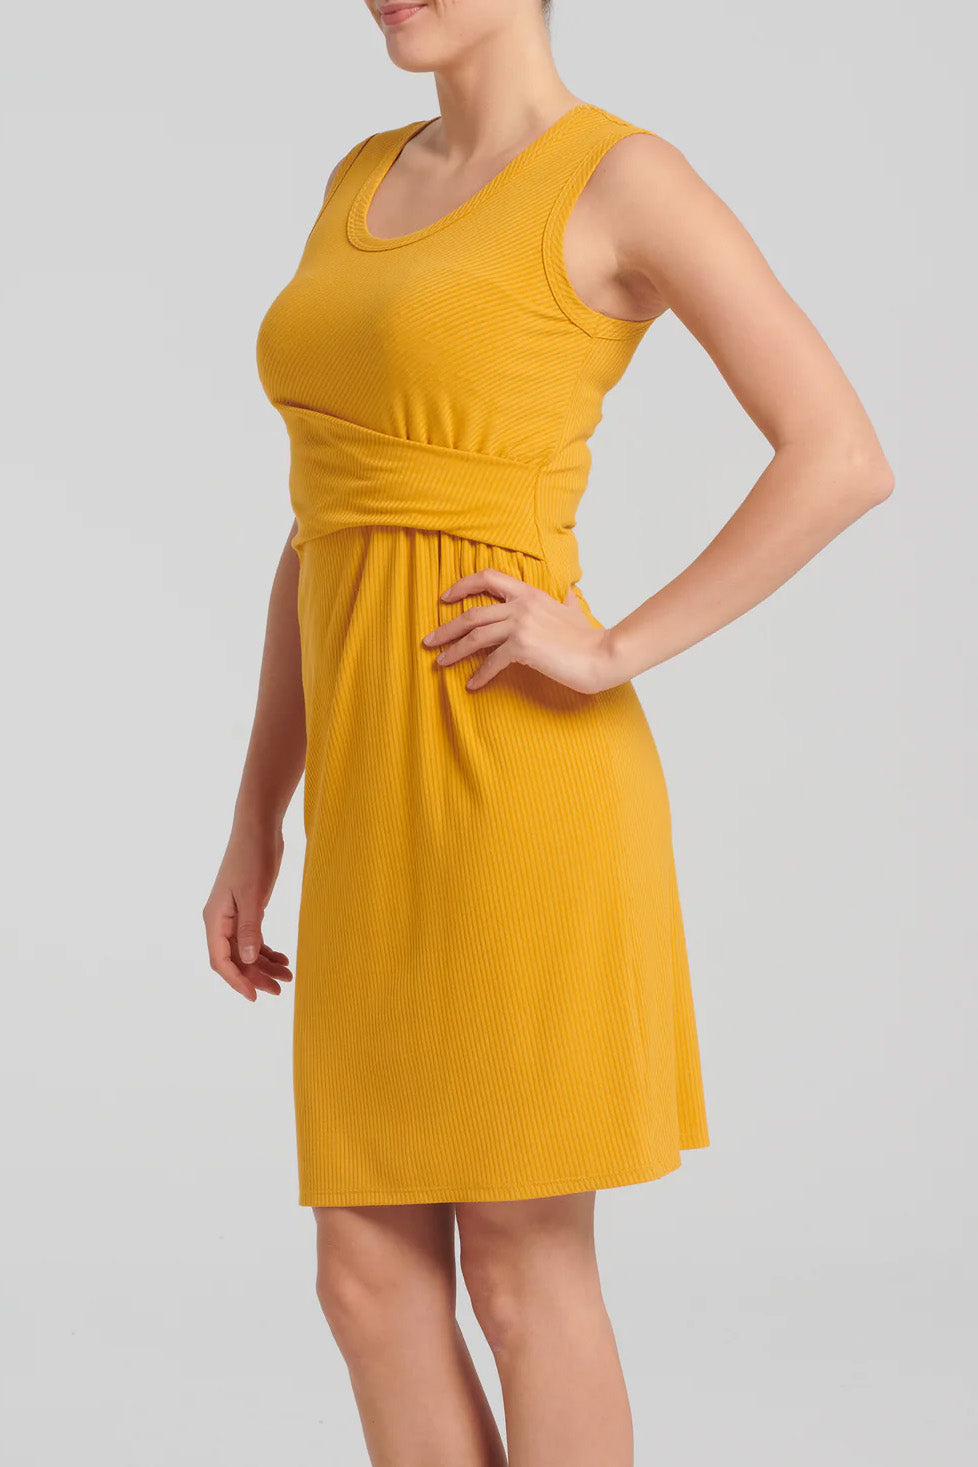 Saranya Dress by Kollontai, Topaz, side view, sleeveless, scoop neck, wide straps, bamboo rib-knit, pleat details at waist, straight cut, knee length, sizes XS to XXL, made in Quebec